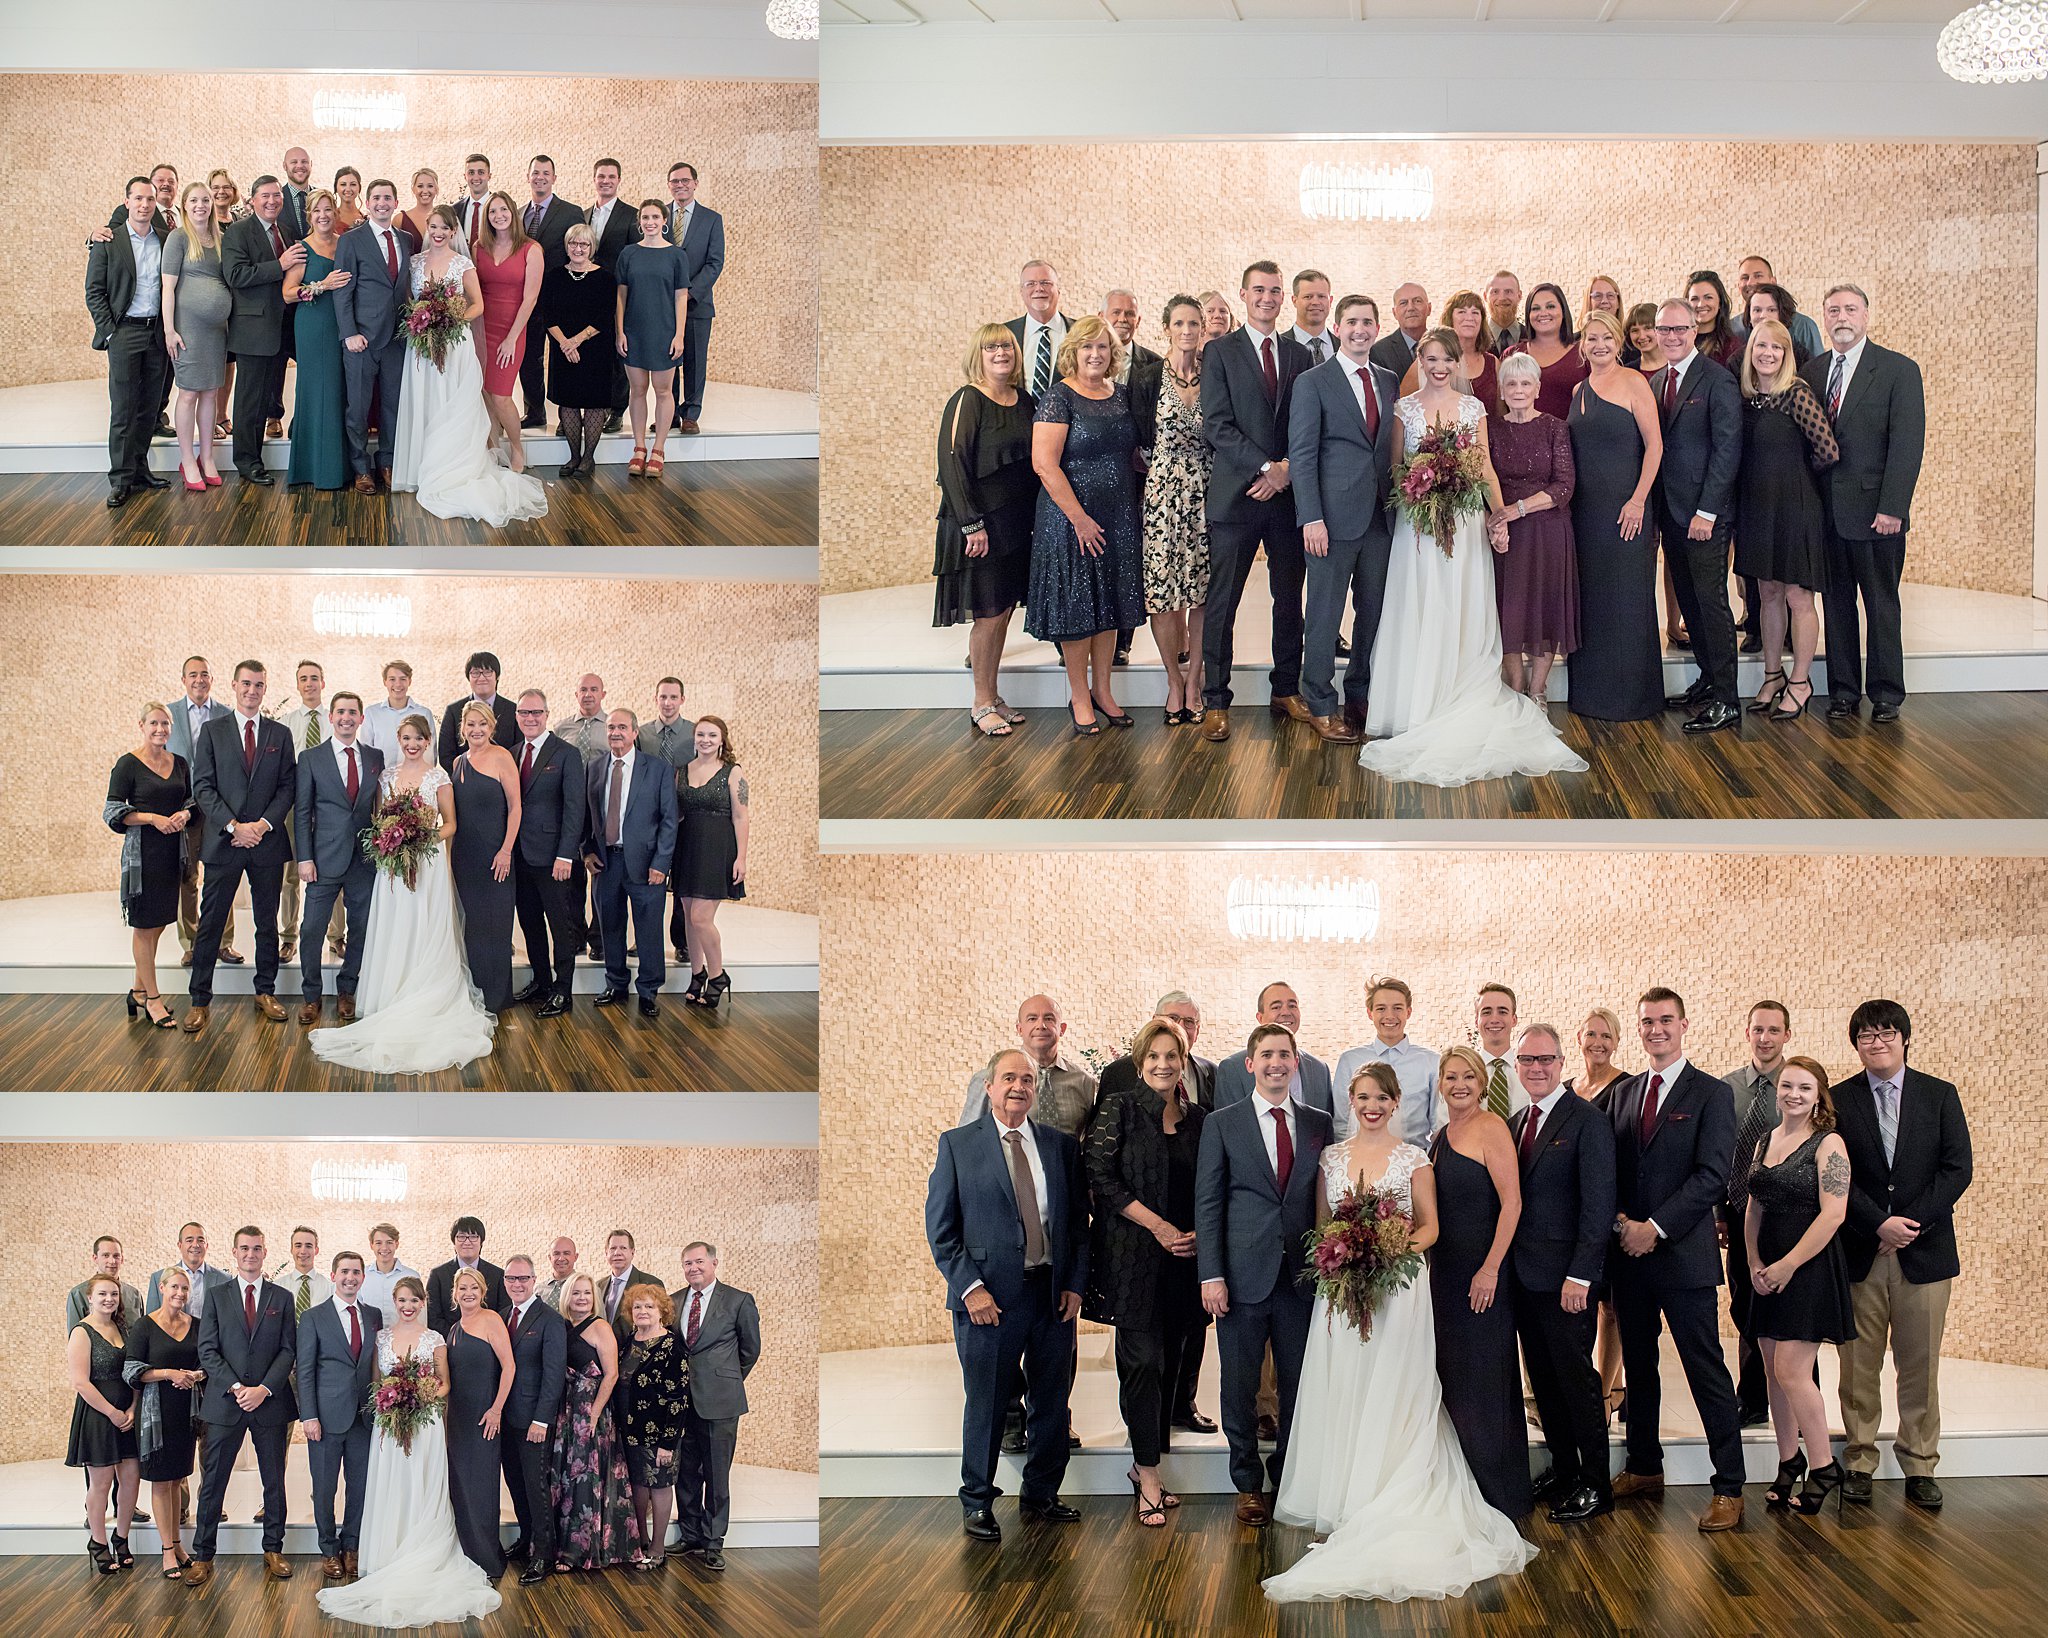 Alley + Eric Paral | Wedding | The Allure | La Porte, IN | Toni Jay Photography